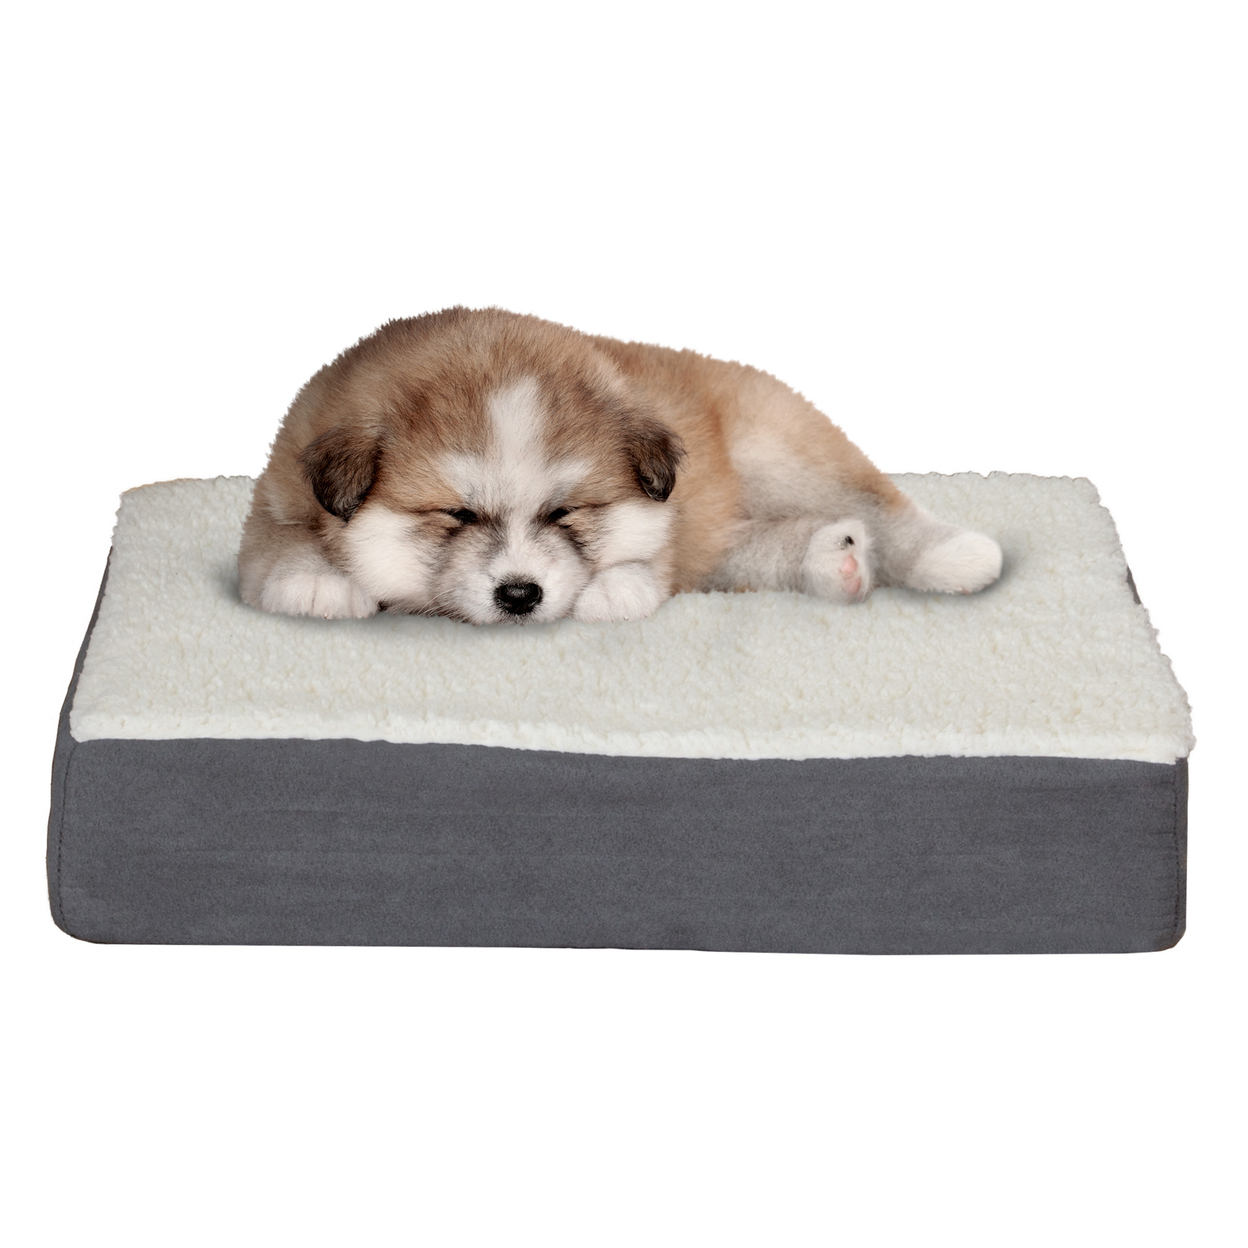 Orthopedic Dog Bed Memory Foam Cozy Sherpa 20 X 15 X 4 Washable Cover - Gray